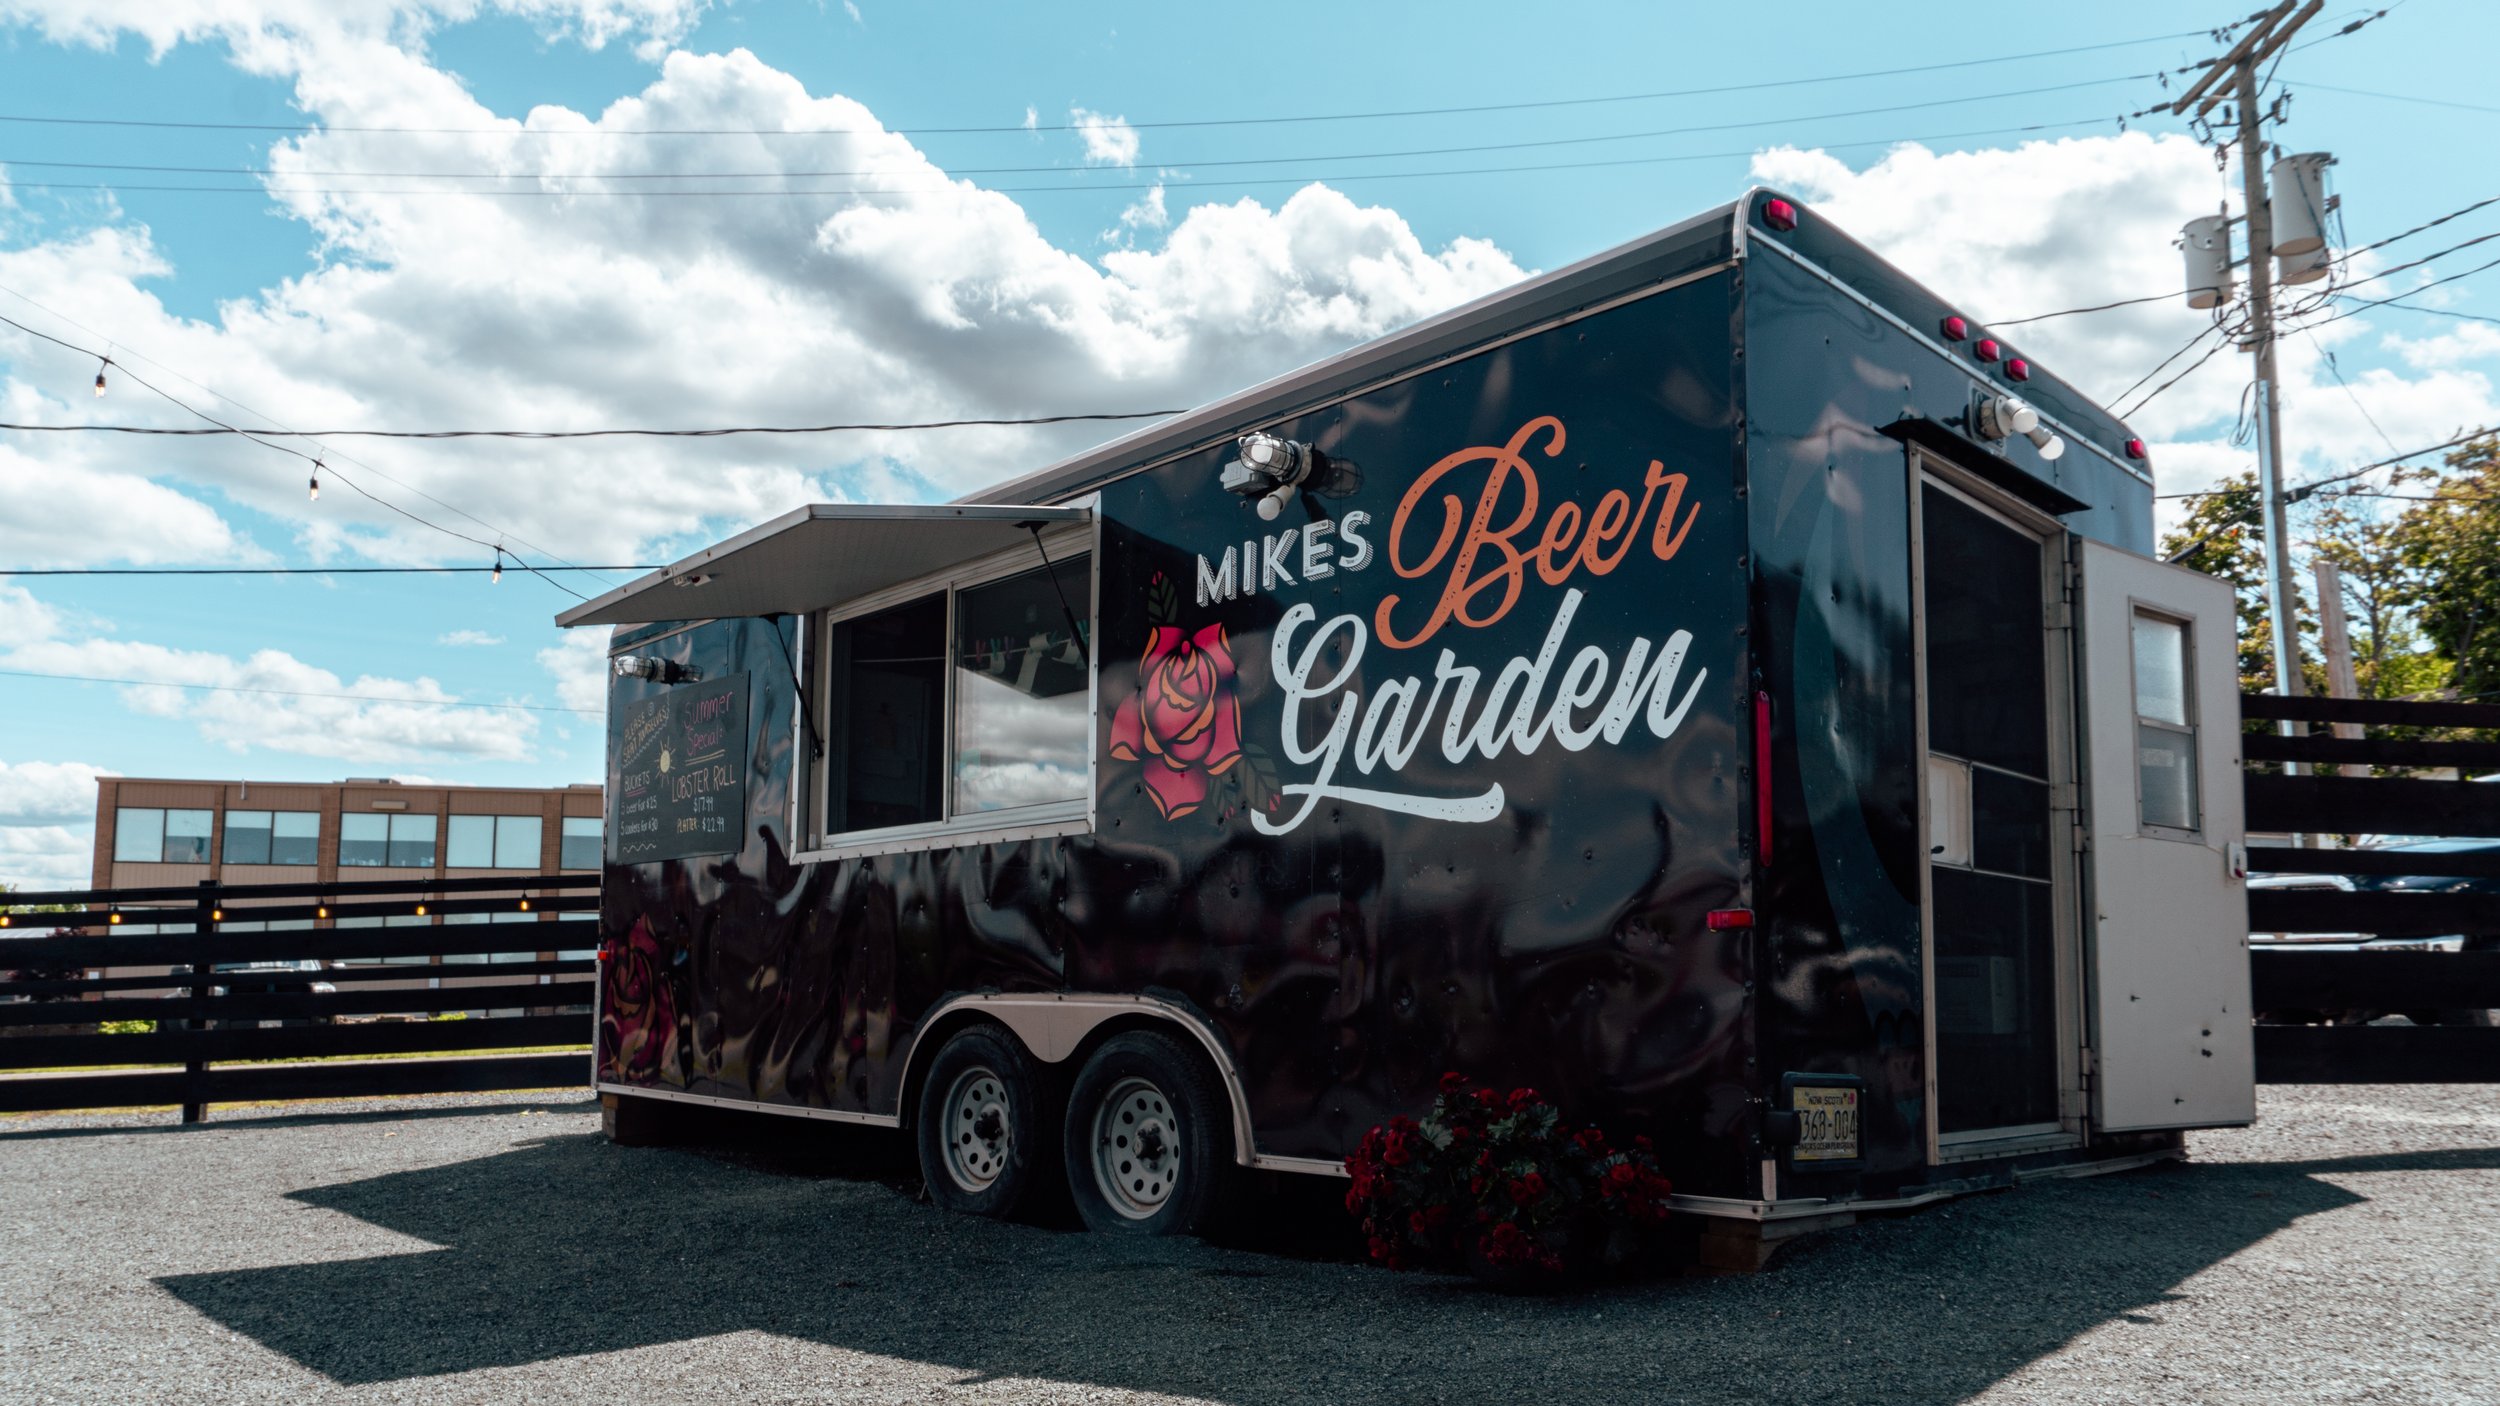 Check out Mike's Beer Garden